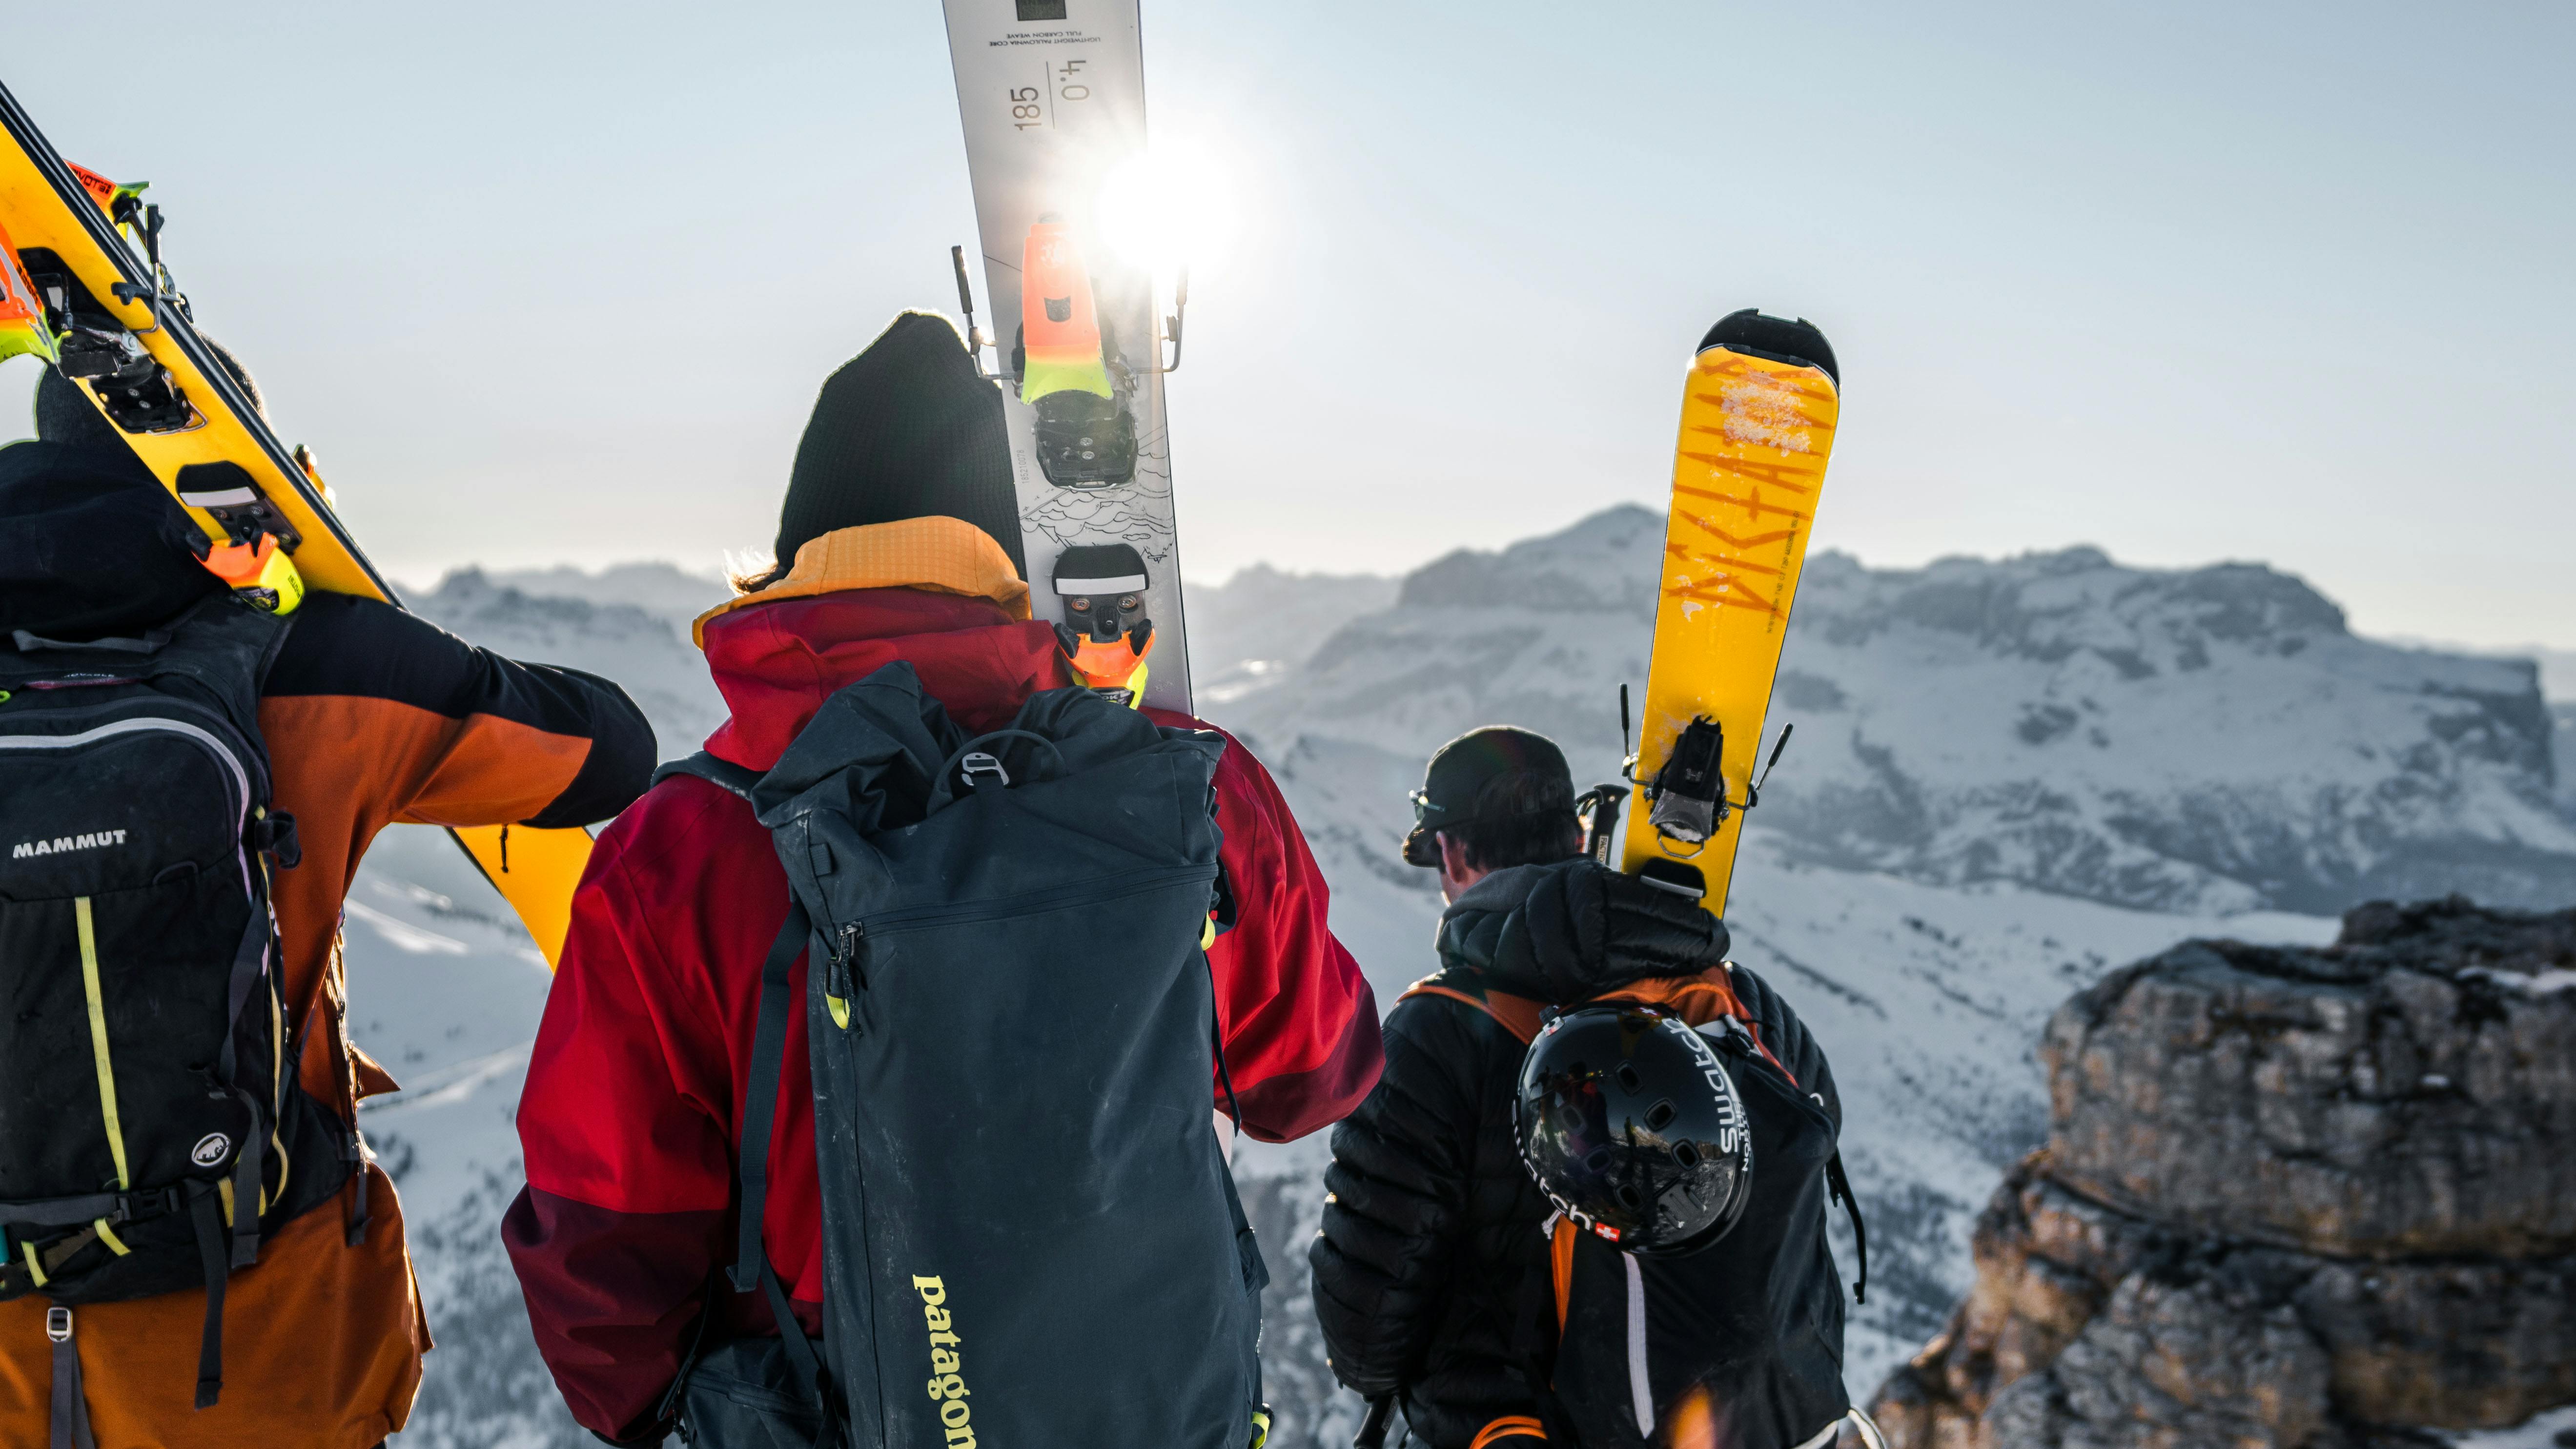 Three skiers carry their skis on their shoulders.